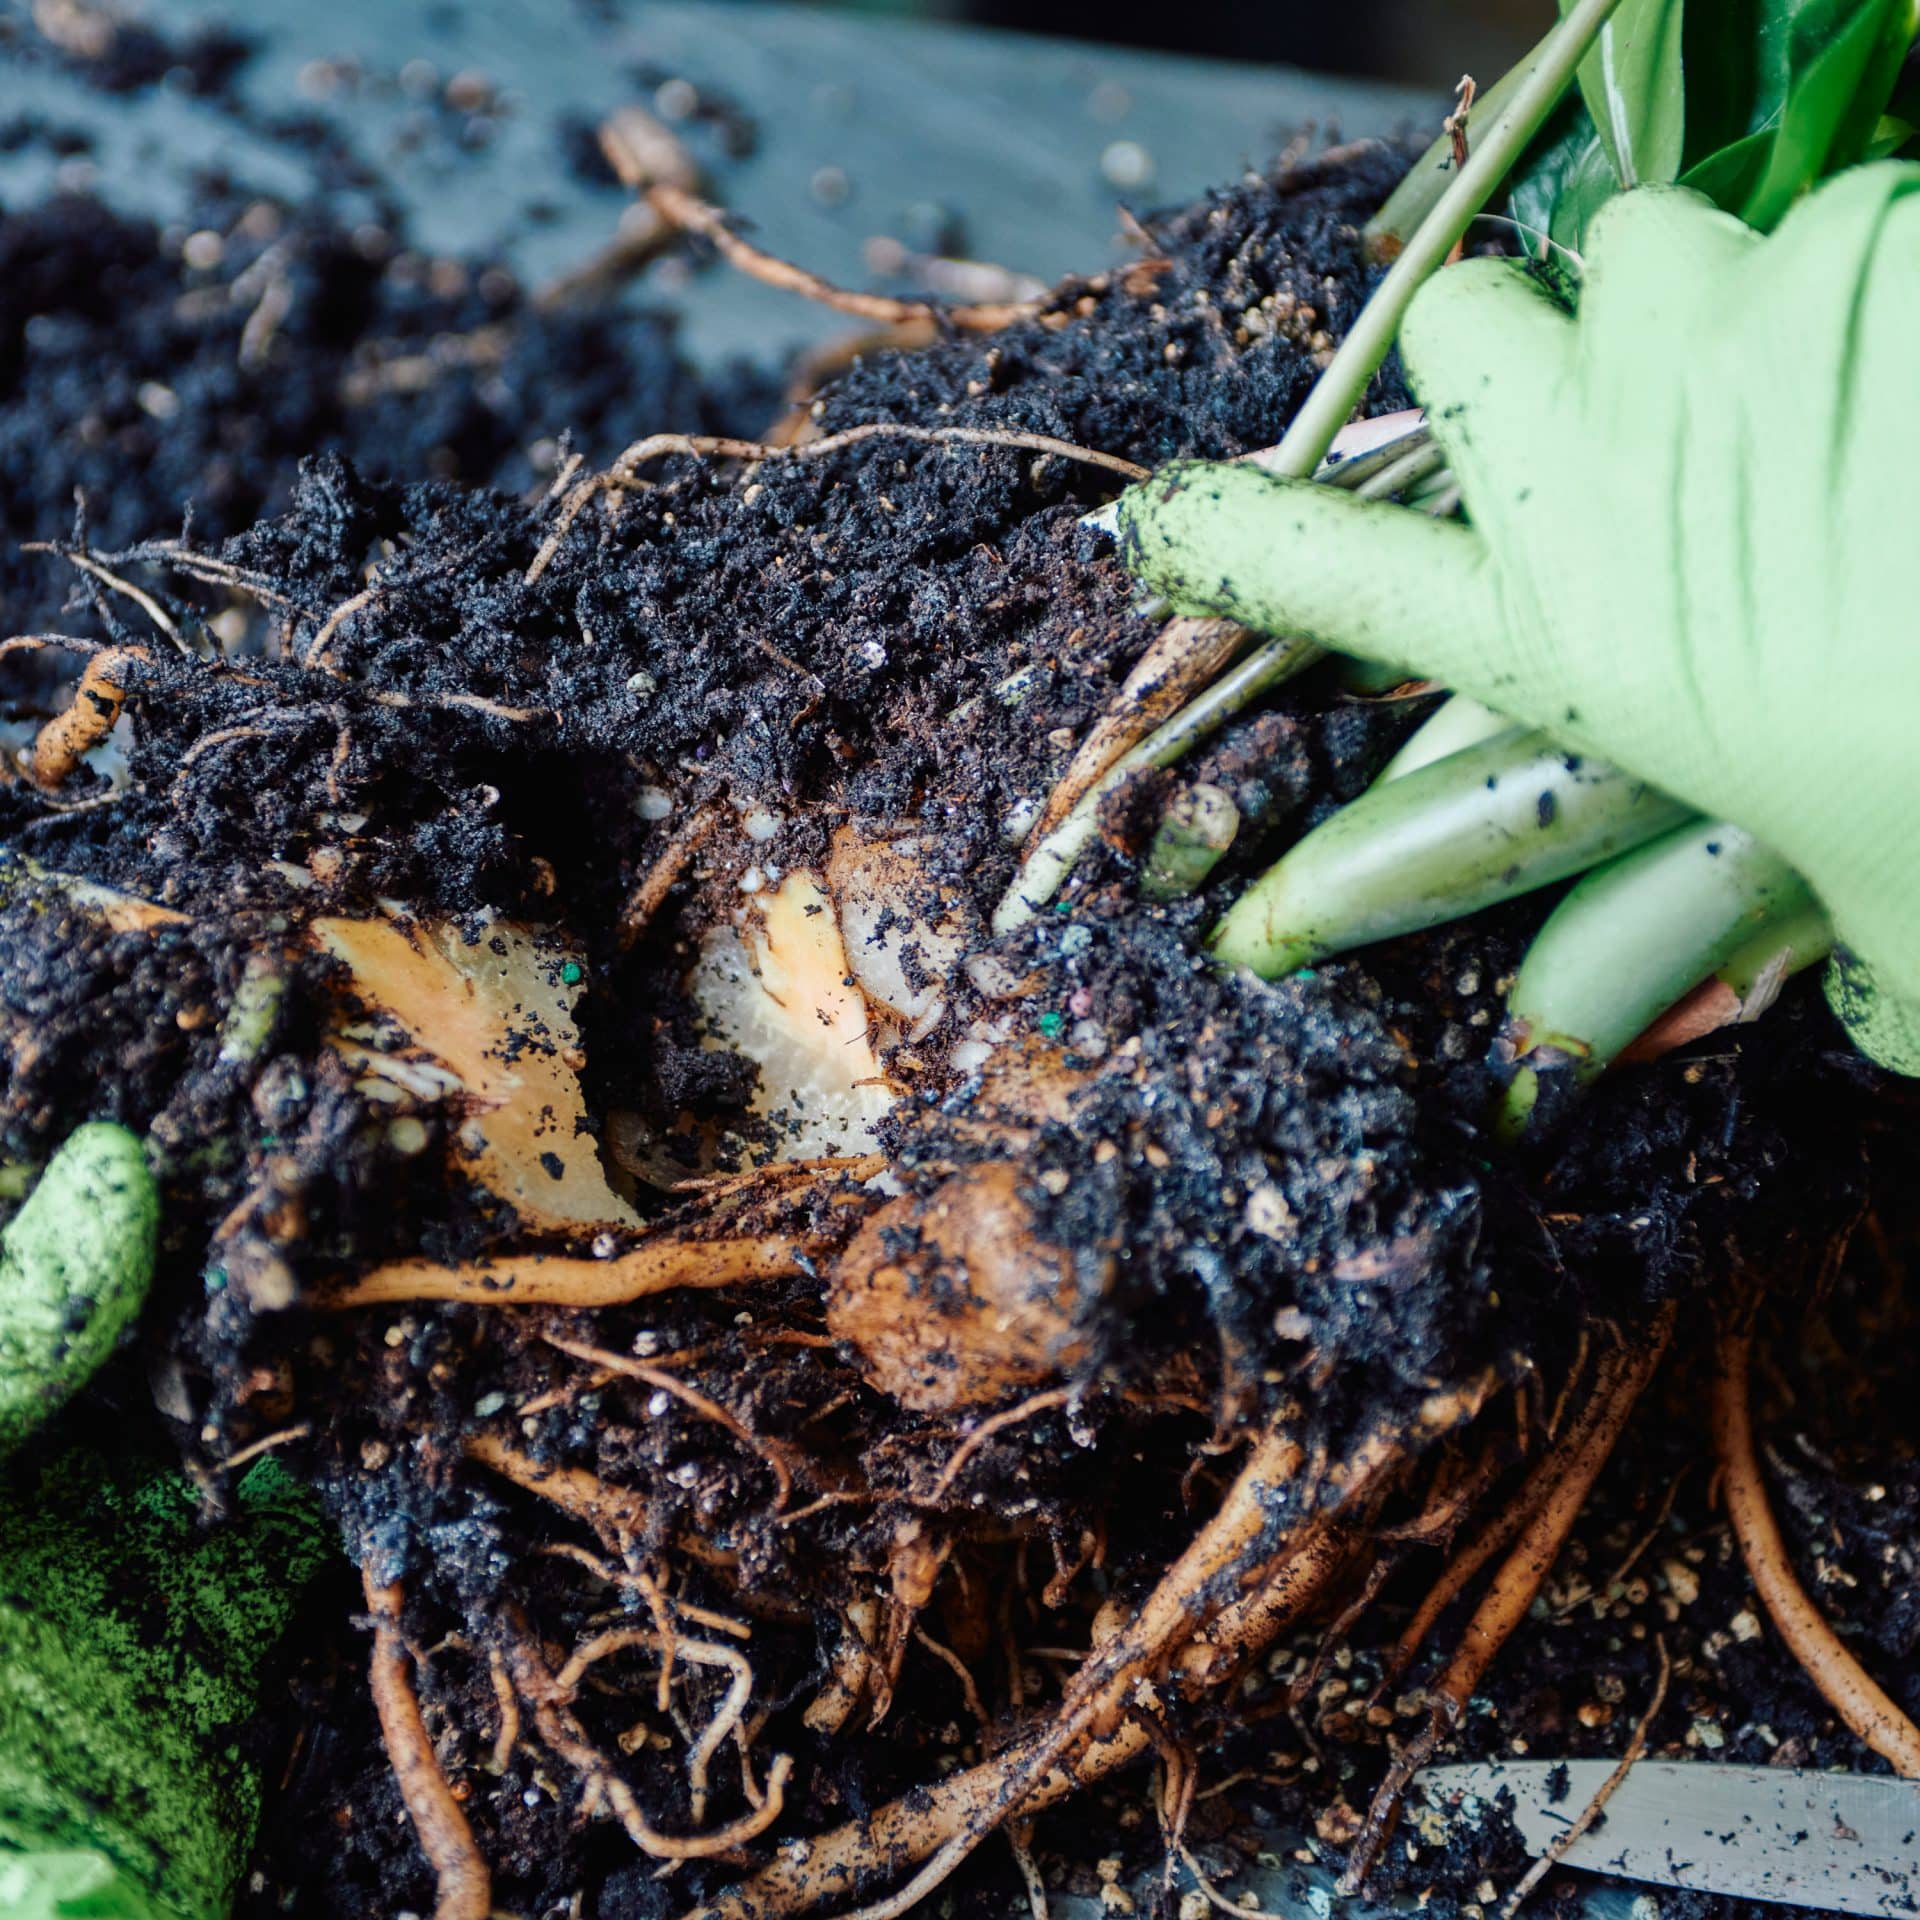 Close-up of a gardener's gloved hand holding a knife and dividing a ZZ plant's root system, revealing freshly cut rhizomes and roots. The rich, dark soil is evident, with small white particles and details of the intricate root network and plant stems visible in the frame.